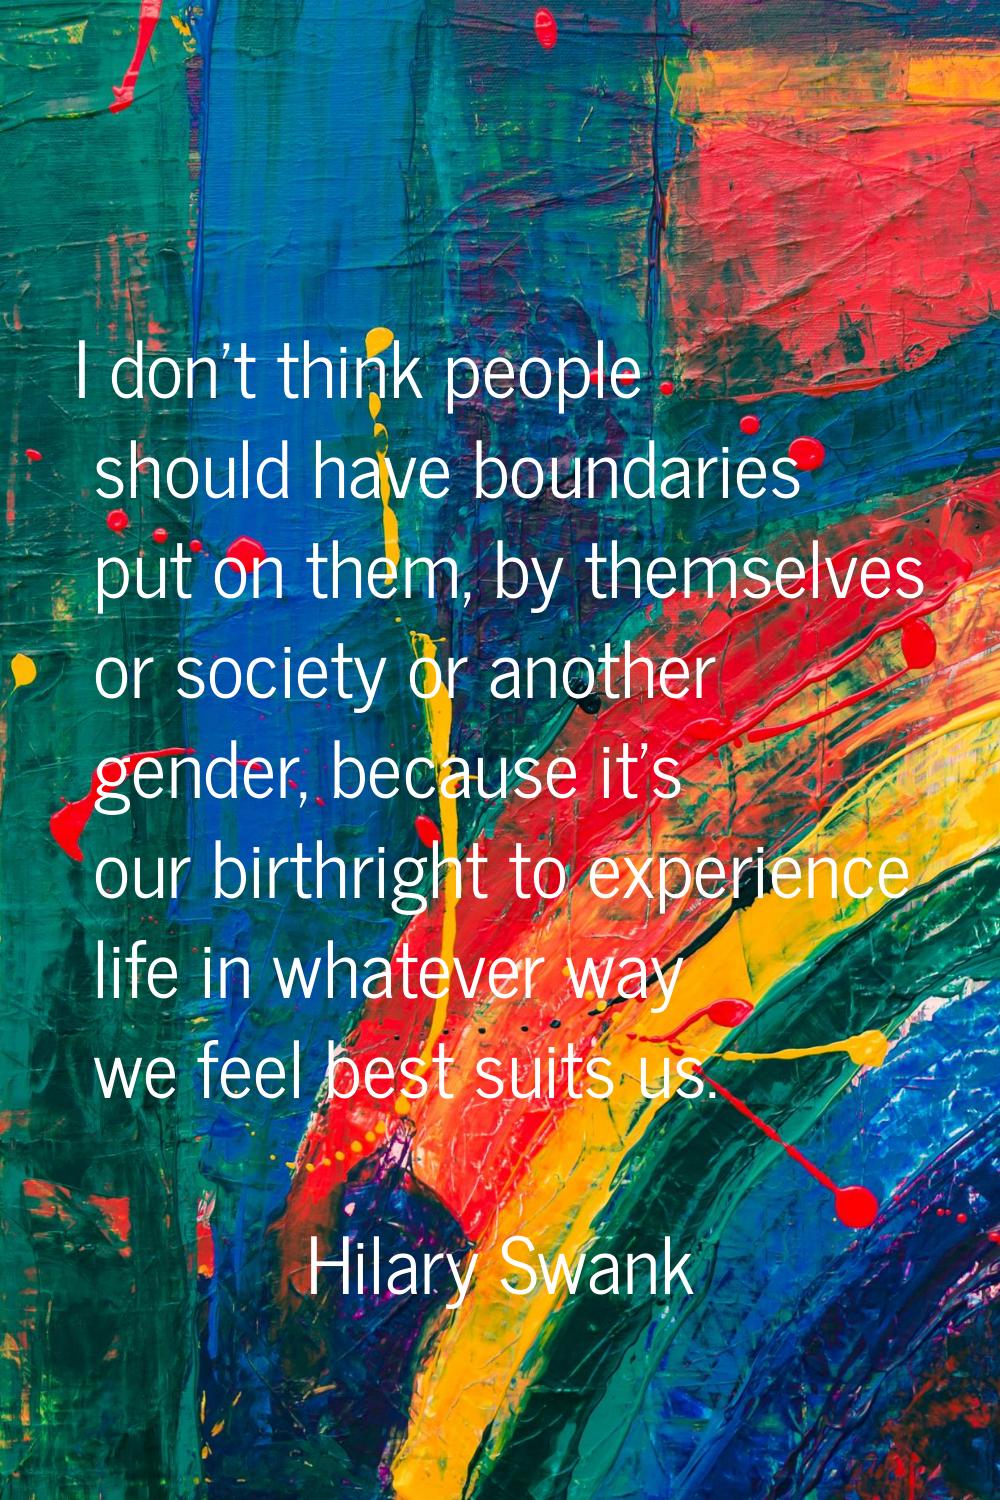 I don't think people should have boundaries put on them, by themselves or society or another gender